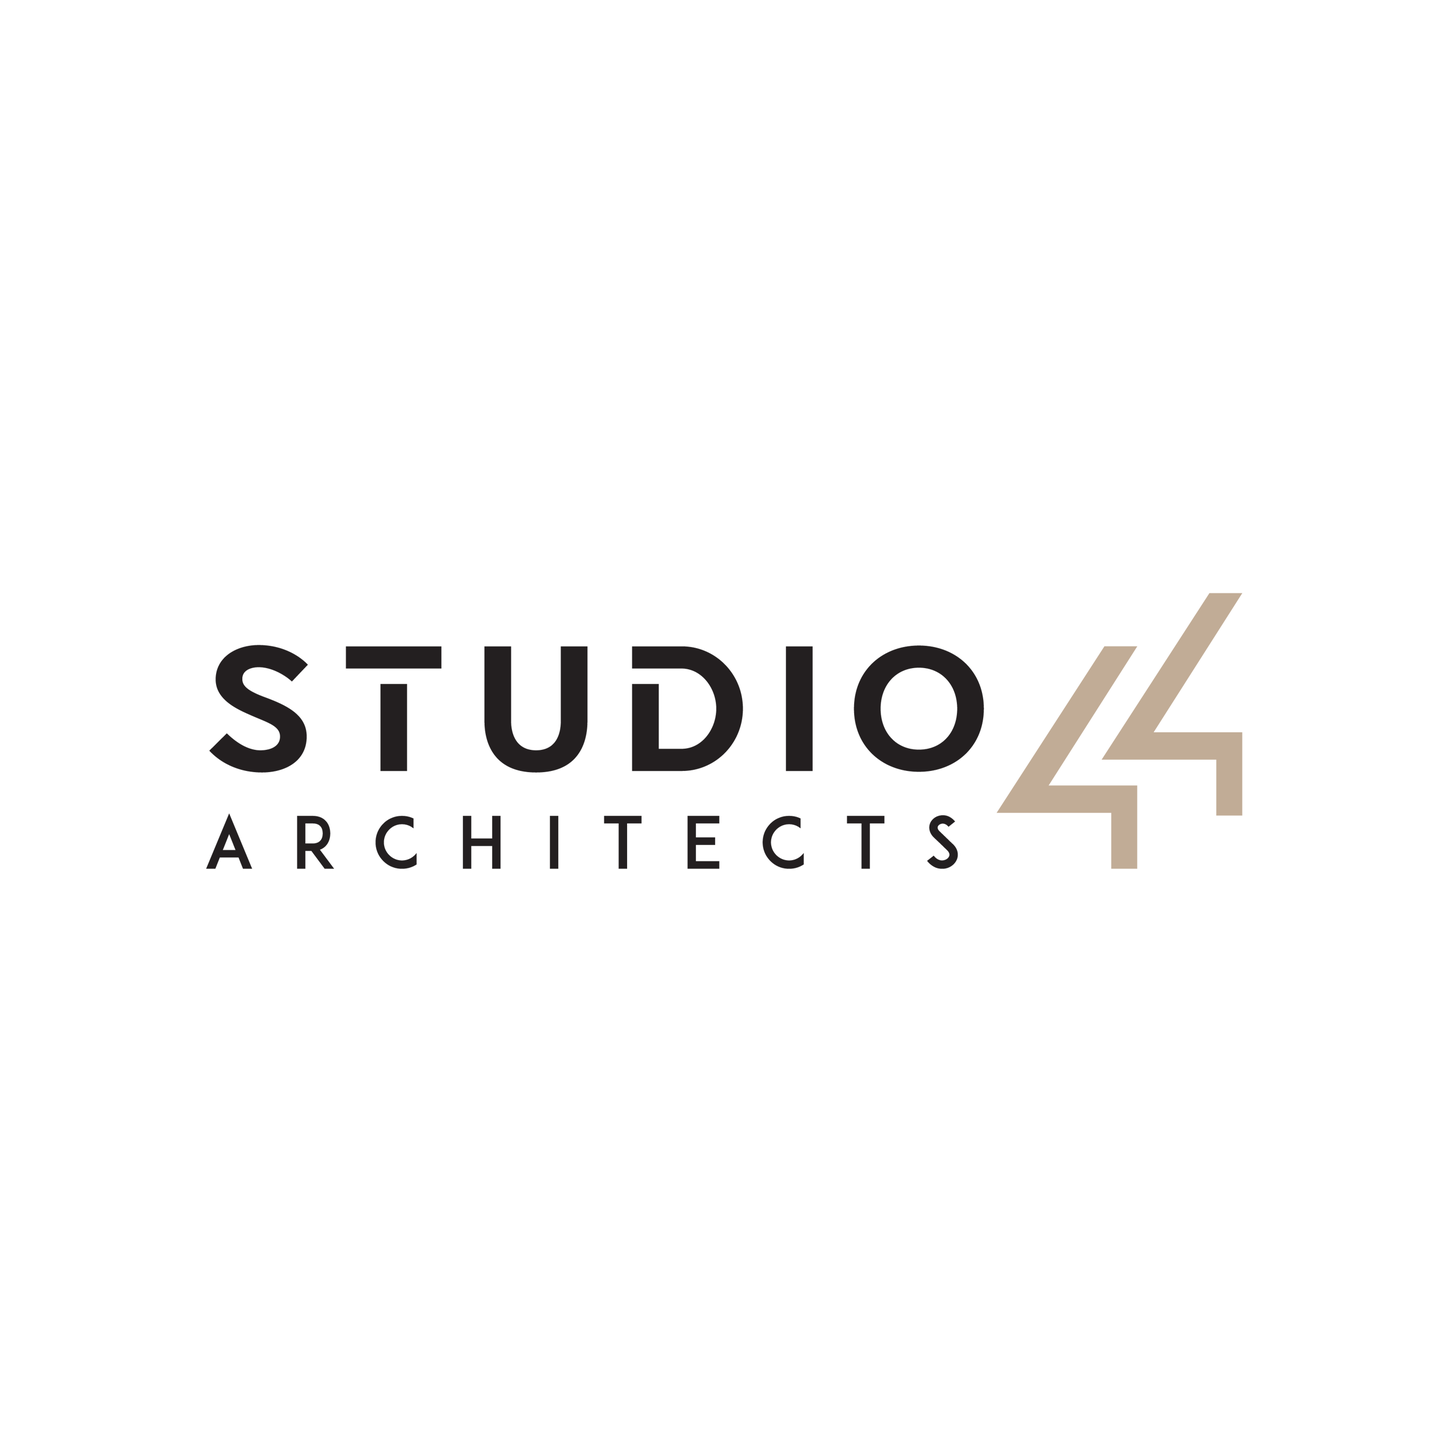 Studio44 Architects|IT Services|Professional Services